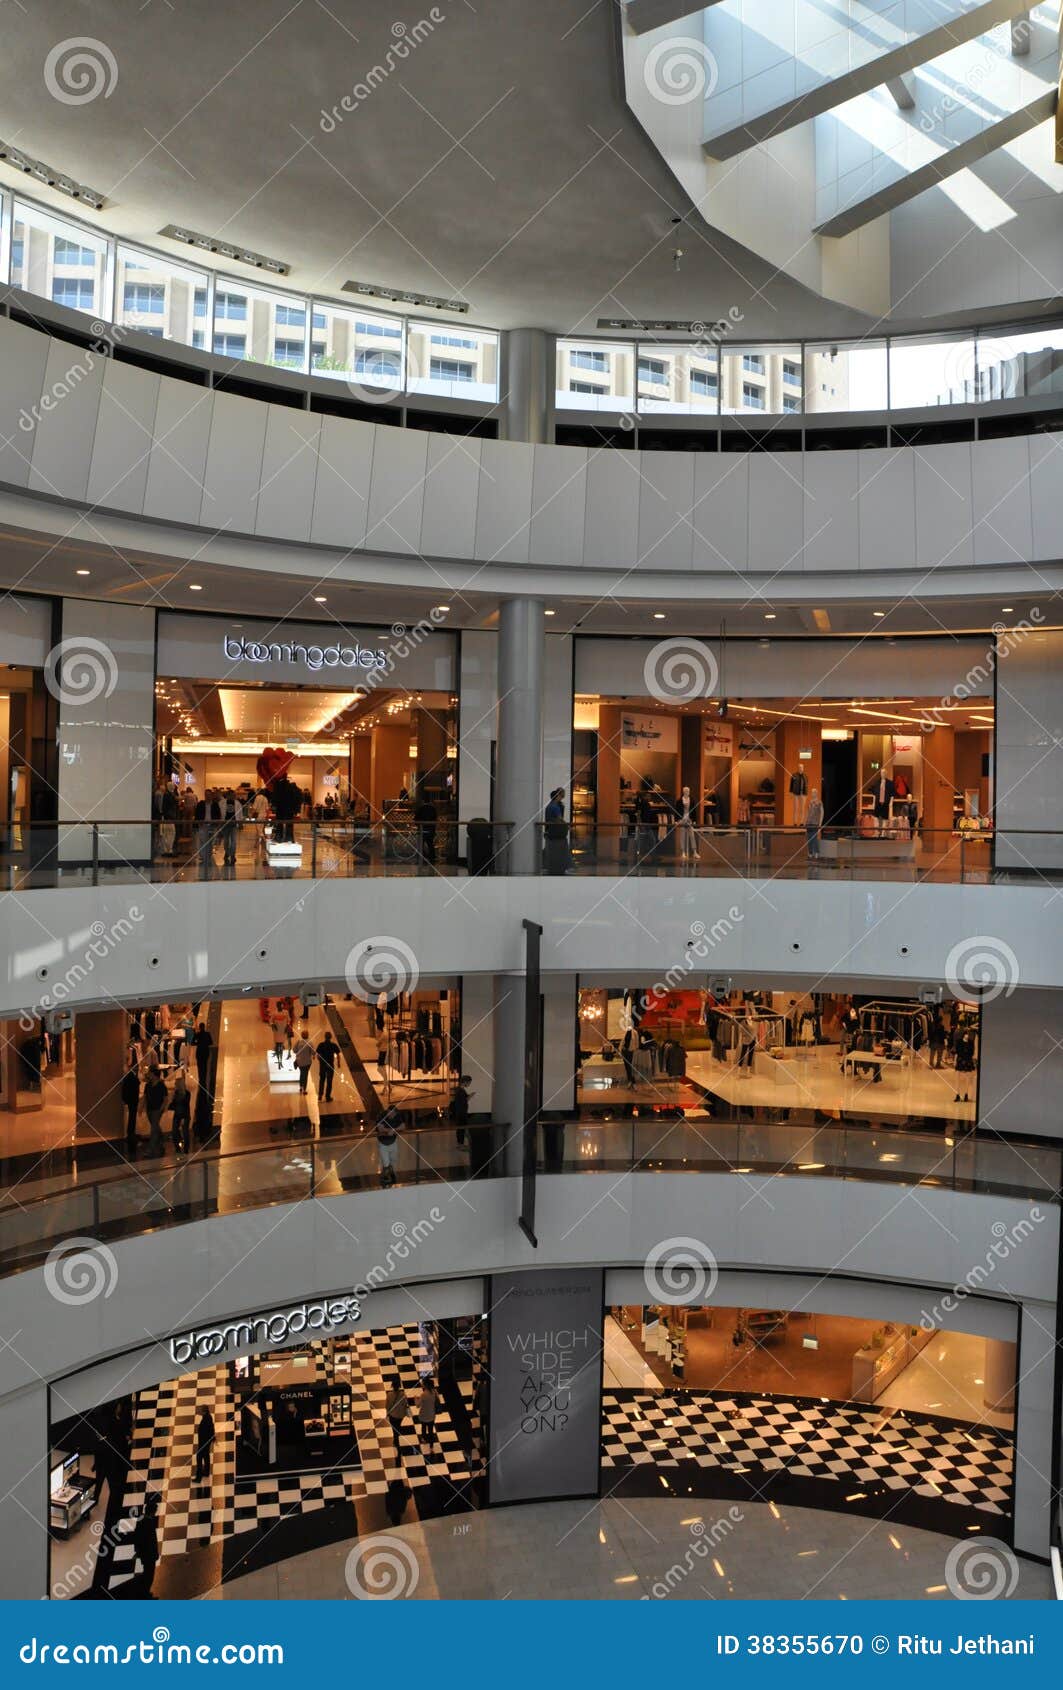 Bloomingdales at Dubai Mall in the UAE Editorial Image - Image of ...